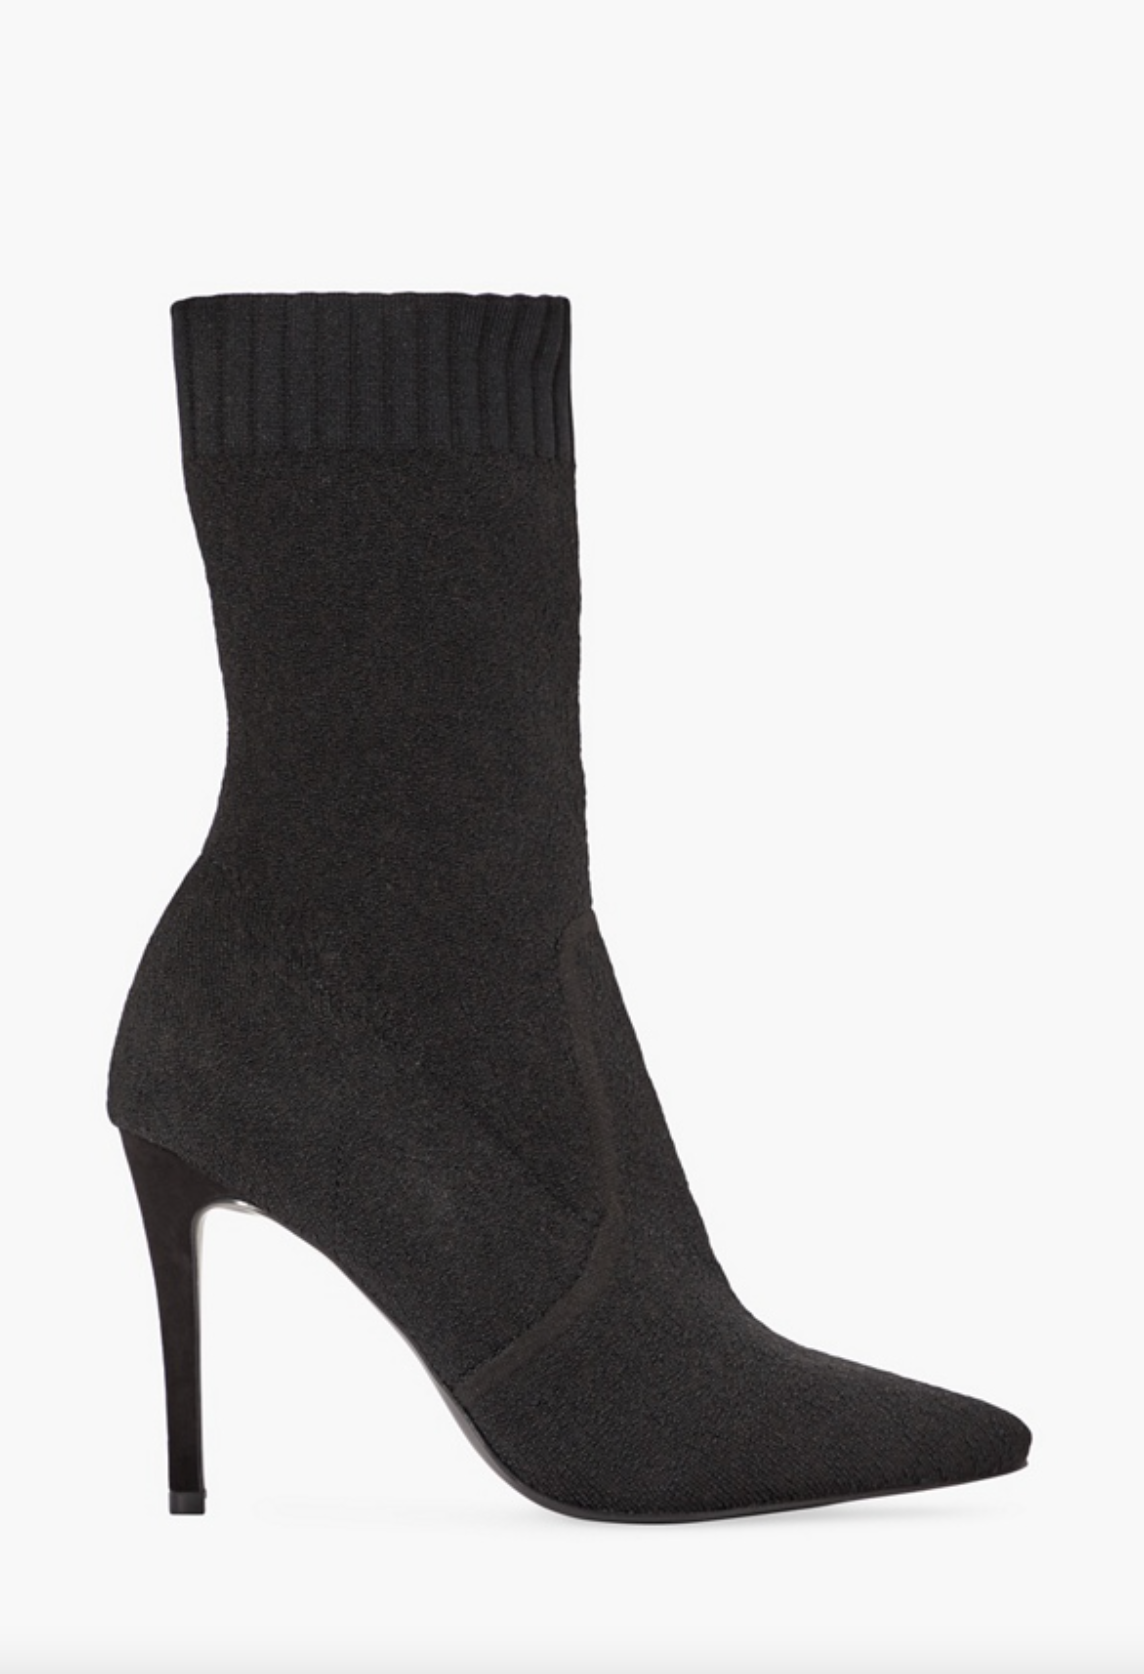 JustFab Tyche Active Knit Stiletto Bootie